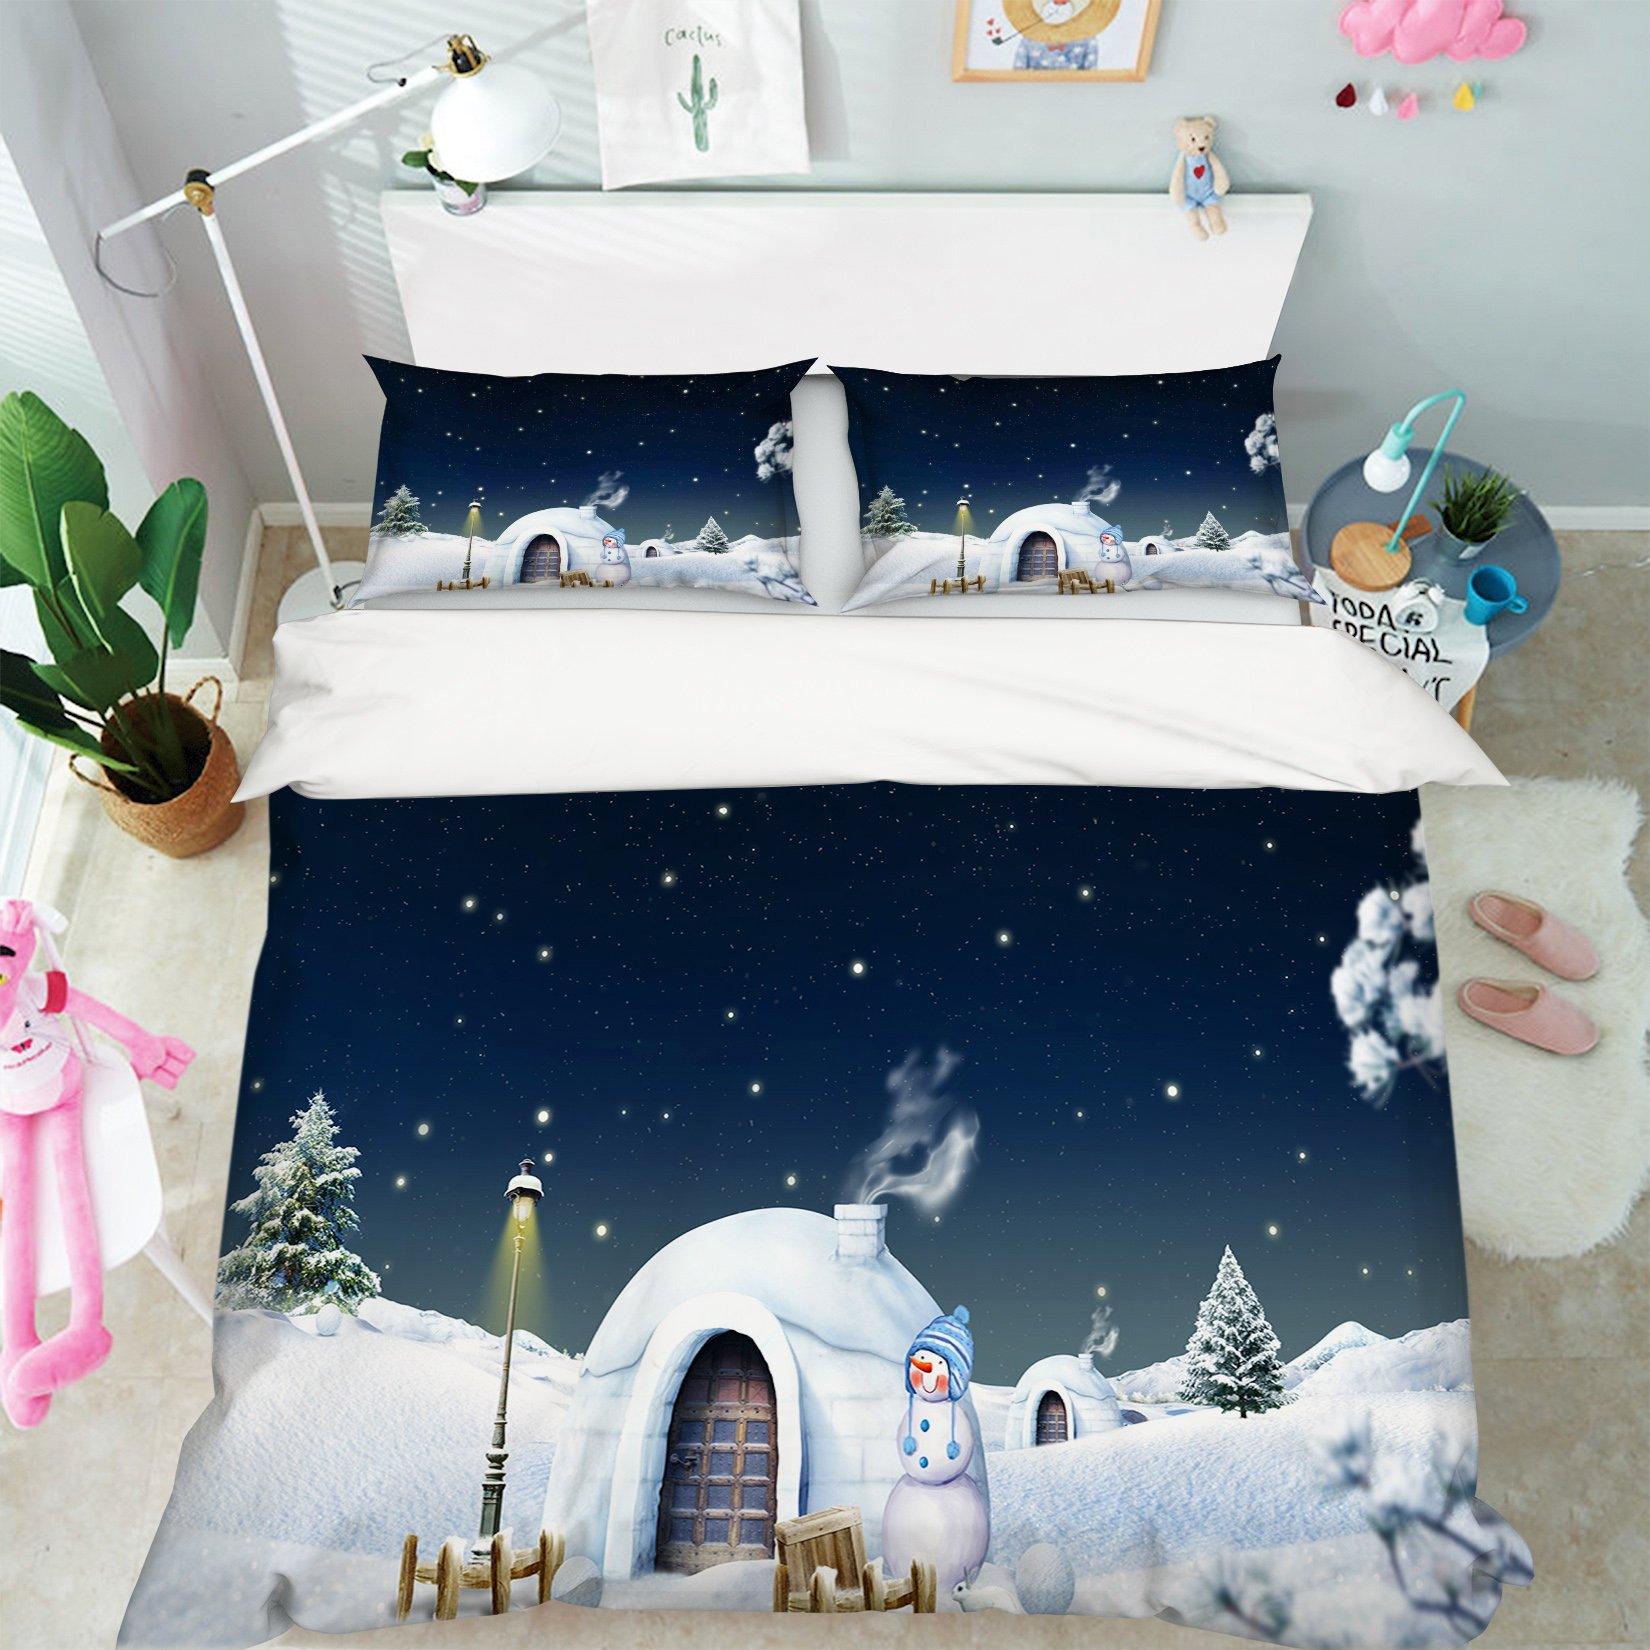 3D Christmas Snow House 16 Bed Pillowcases Quilt Quiet Covers AJ Creativity Home 